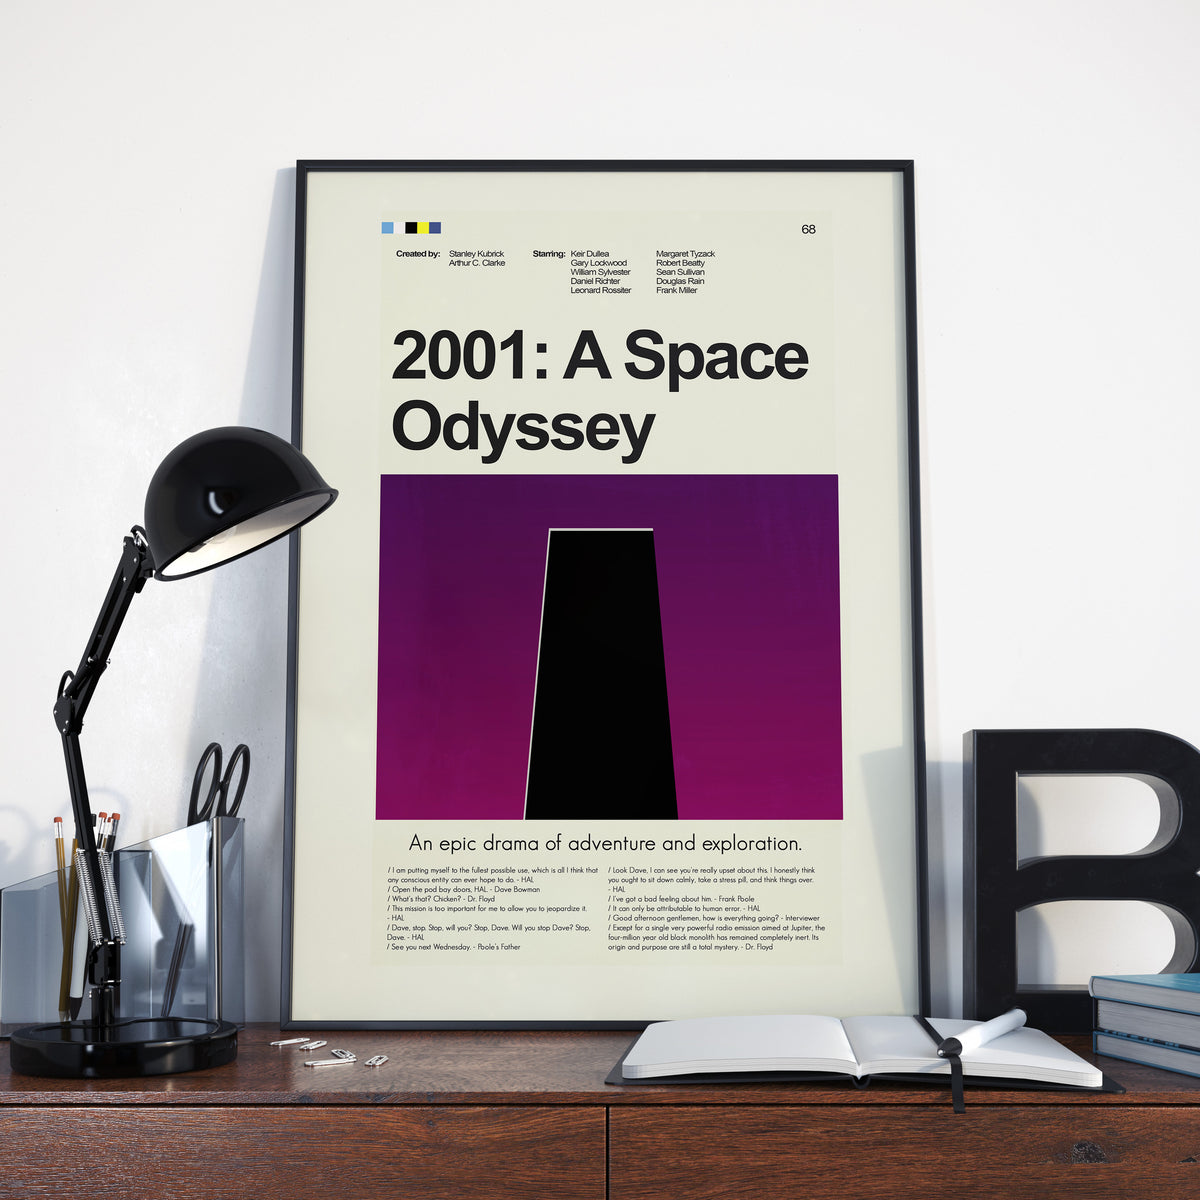 2001: A Space Odyssey - The Monolith | 12"x18" Print Only